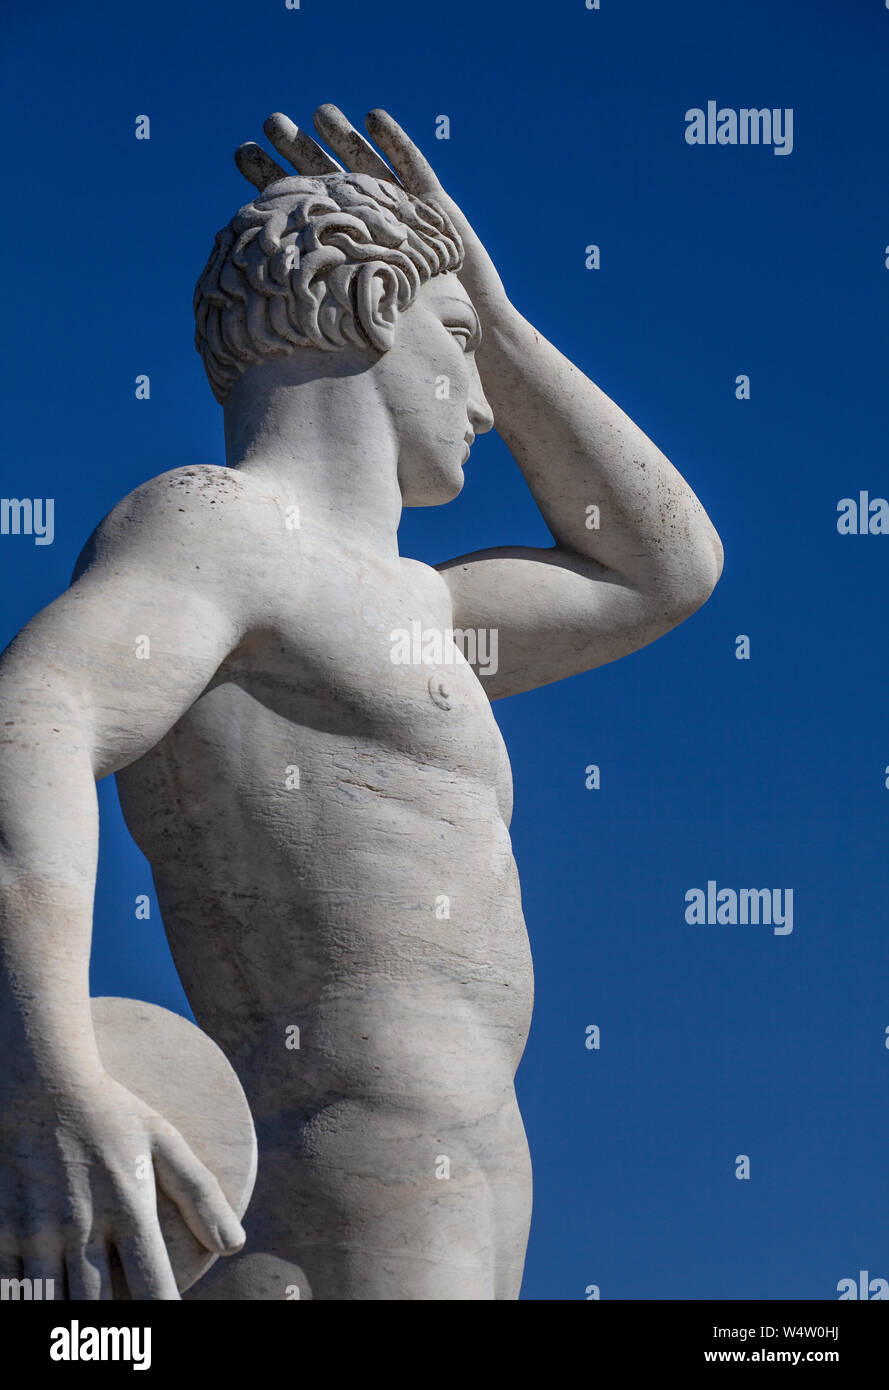 Statue of a discus thrower in the Stadio dei Marmi (Marble Stadium) in Rome. The statue has its hand raised, looking into the distance with a blue sky Stock Photo